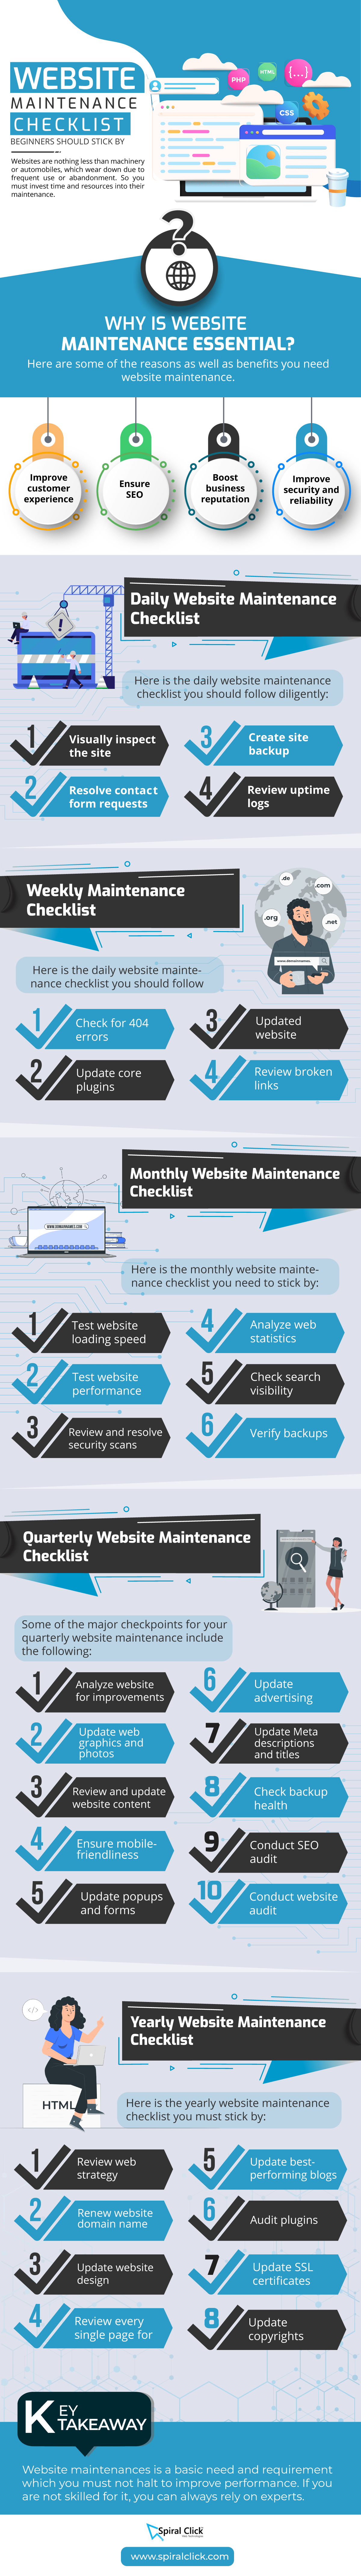 Website Maintenance Checklist Beginners Should Stick By [Infographic]